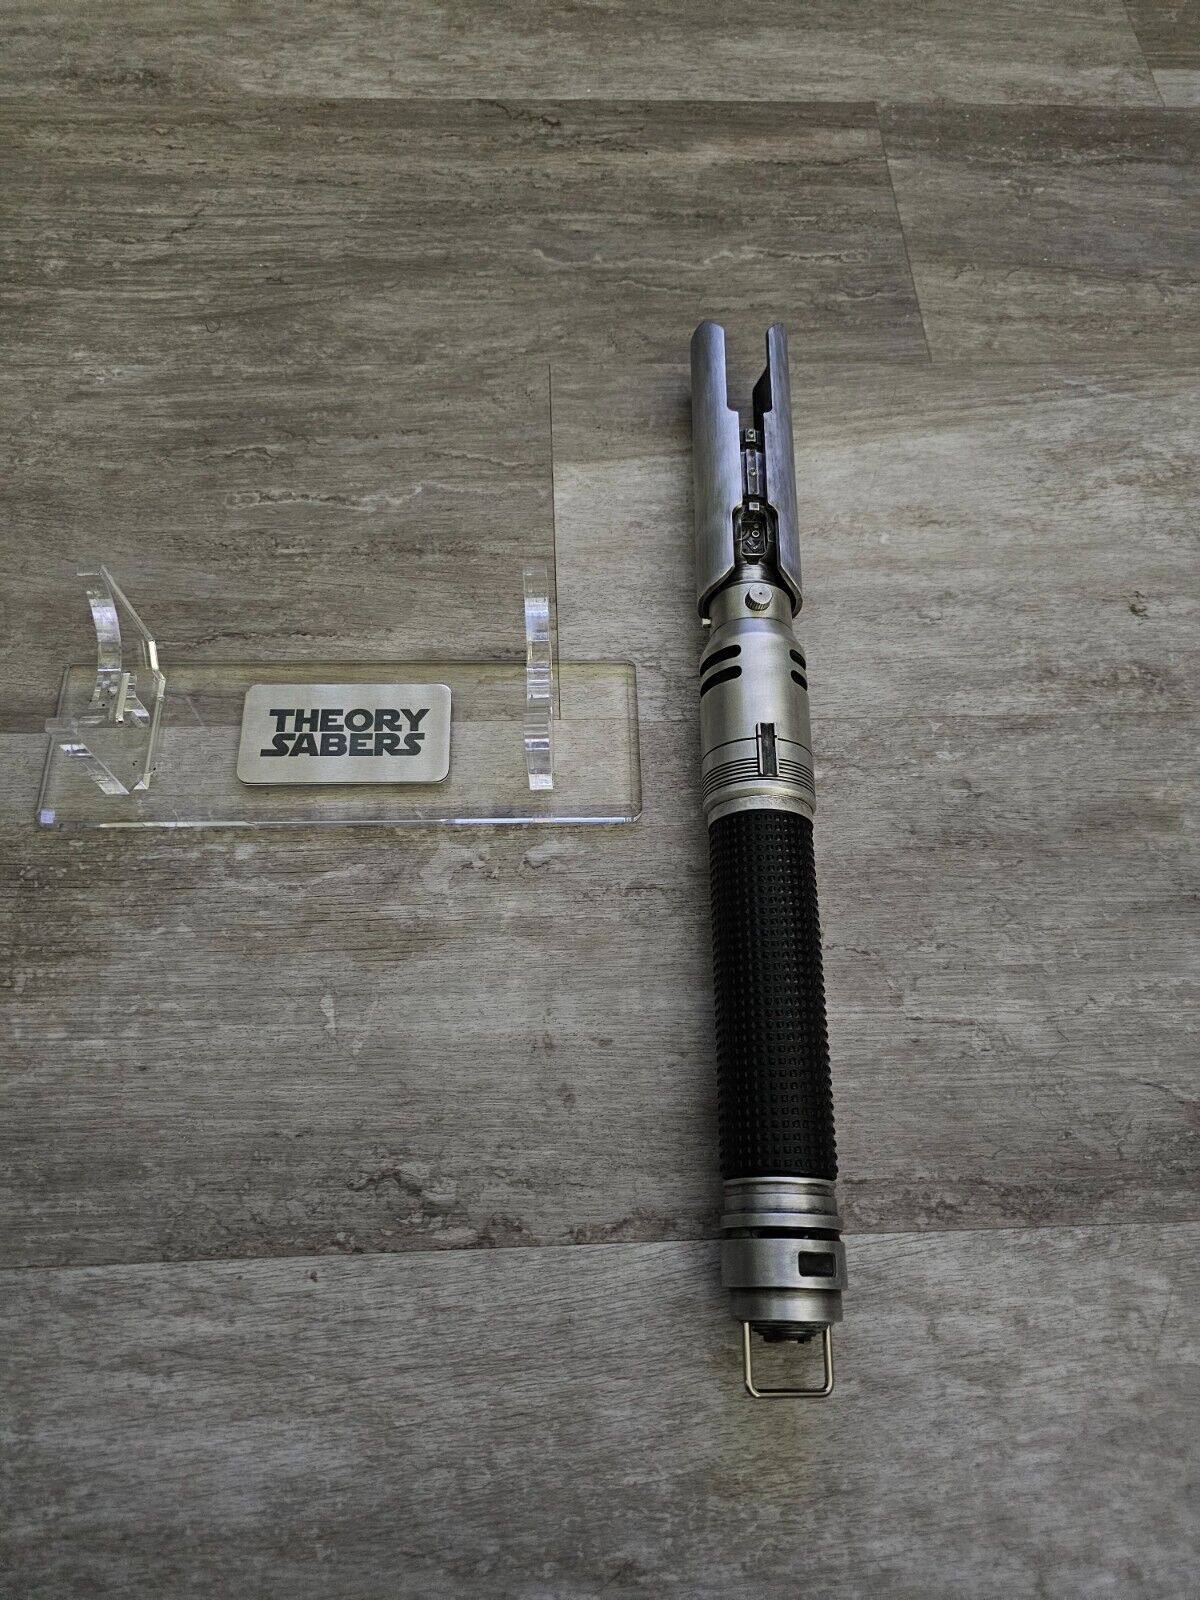 Theory Sabers - Survivor EP IV Weathered Lightsaber